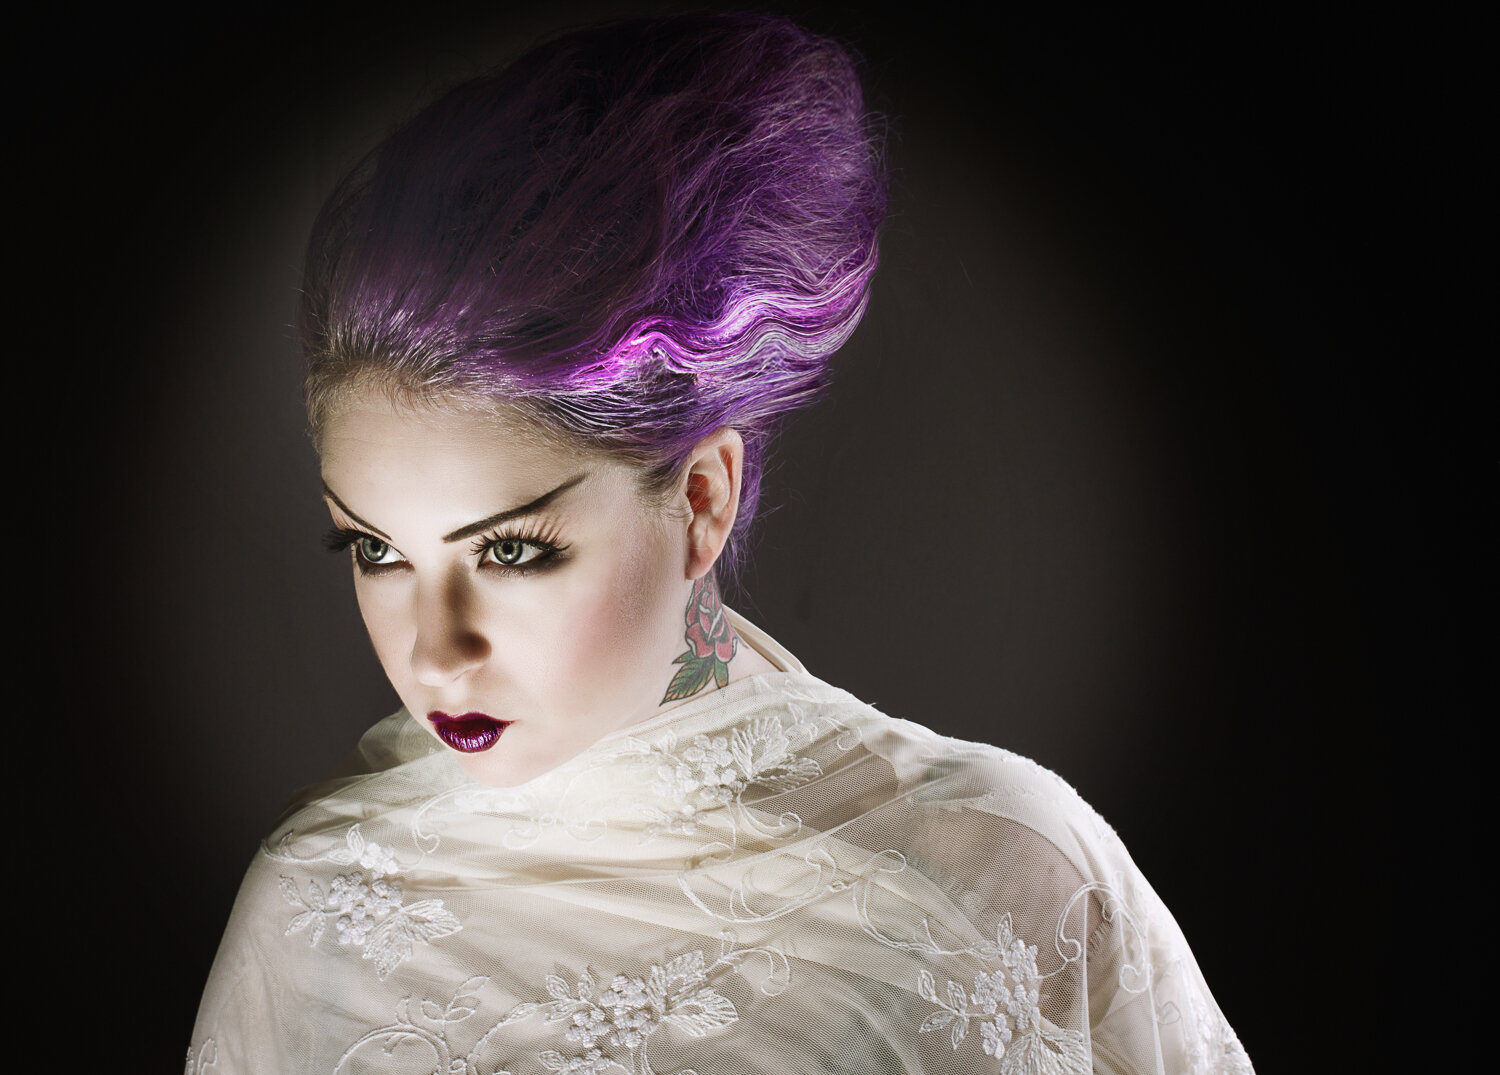 sarah clements photographer AND model -bride of frankenstein in halloween edition of the joplin toad.jpg